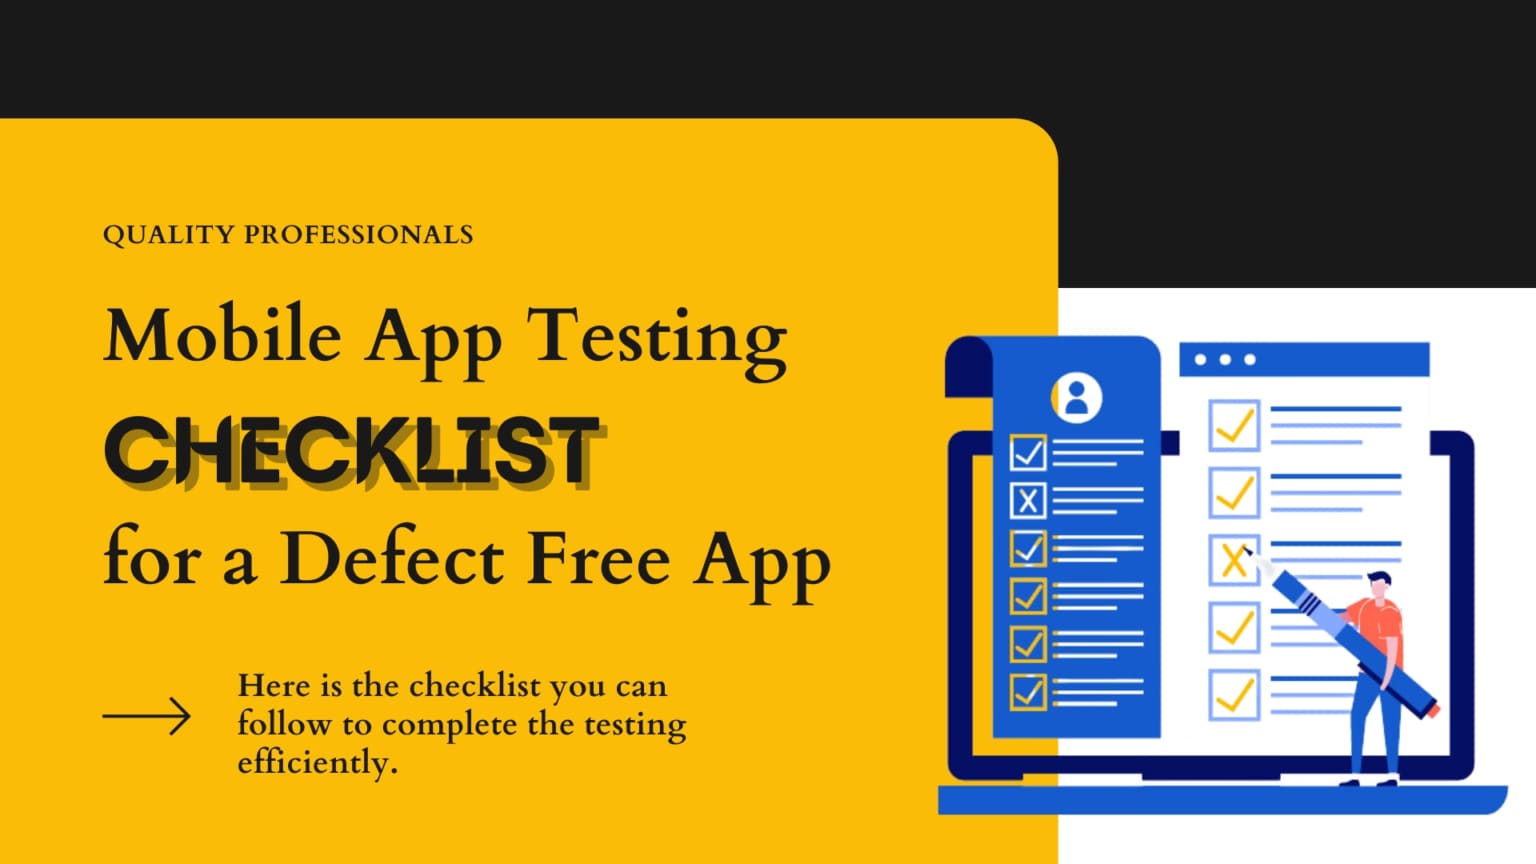 Mobile App Testing Checklist for a Defect Free App